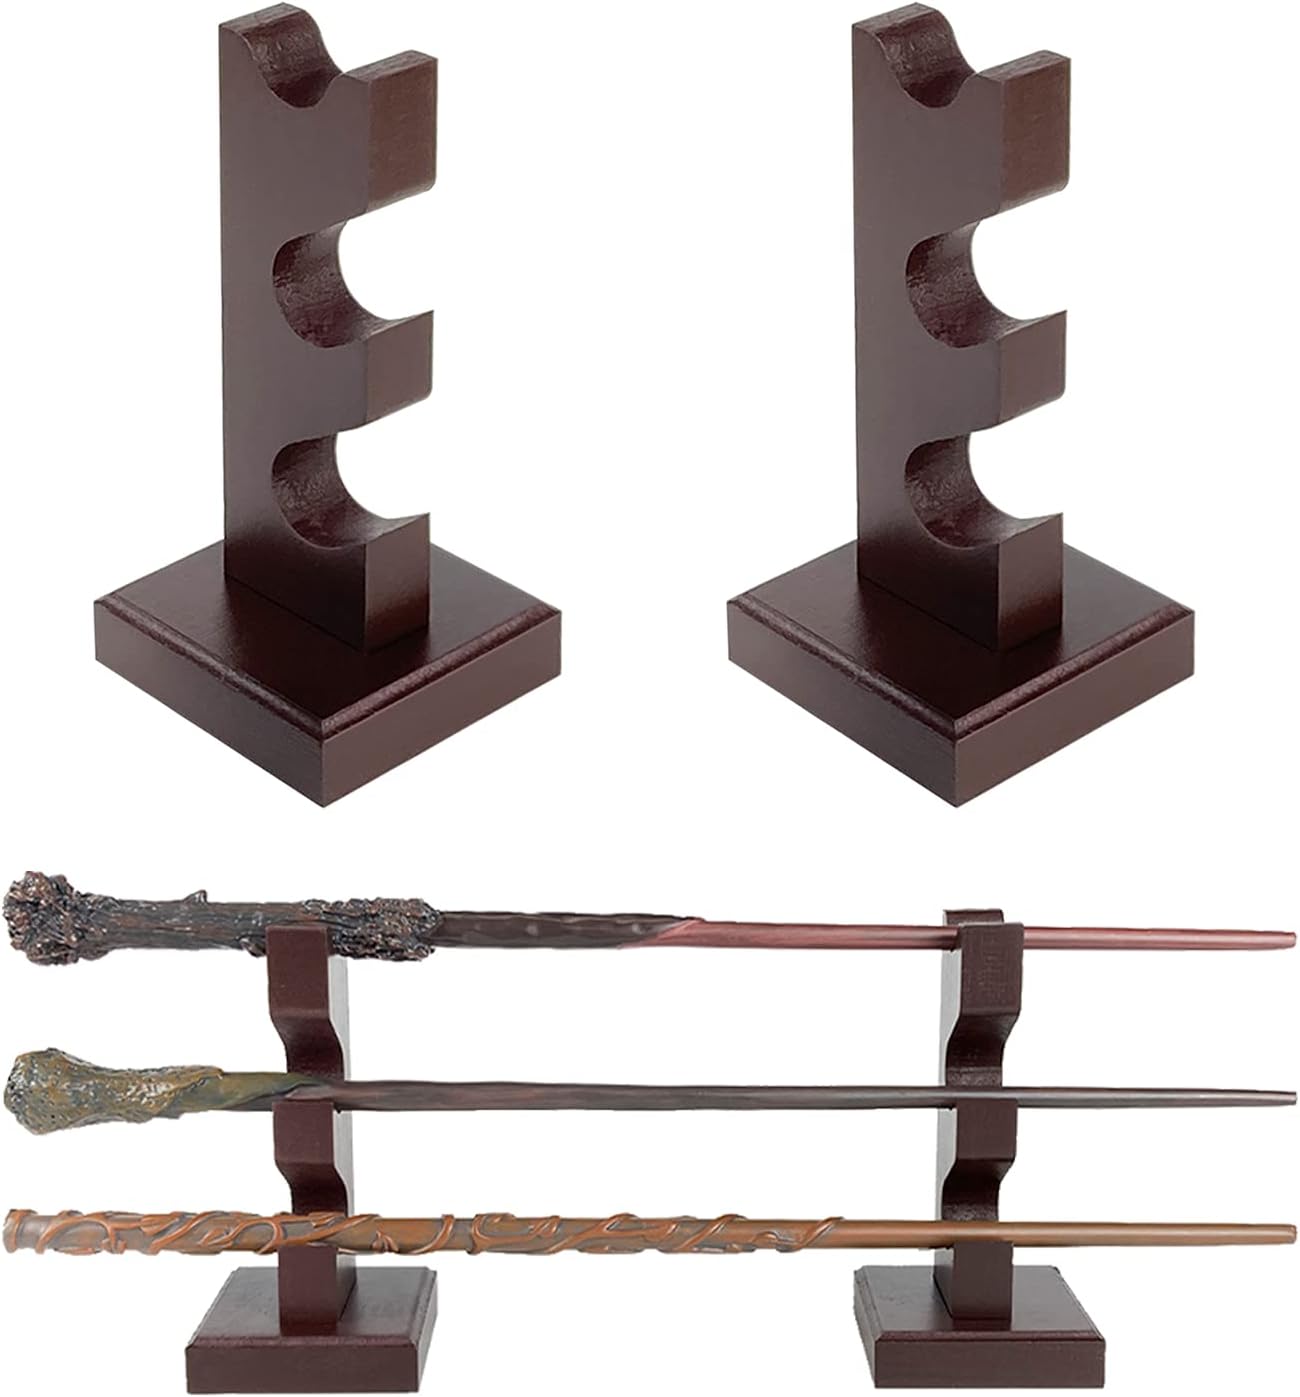 Wand Stand Magic Pottermore wand rack Multiple Wand Holder Wizard Wand Holder MAGIC Wand Display Stand